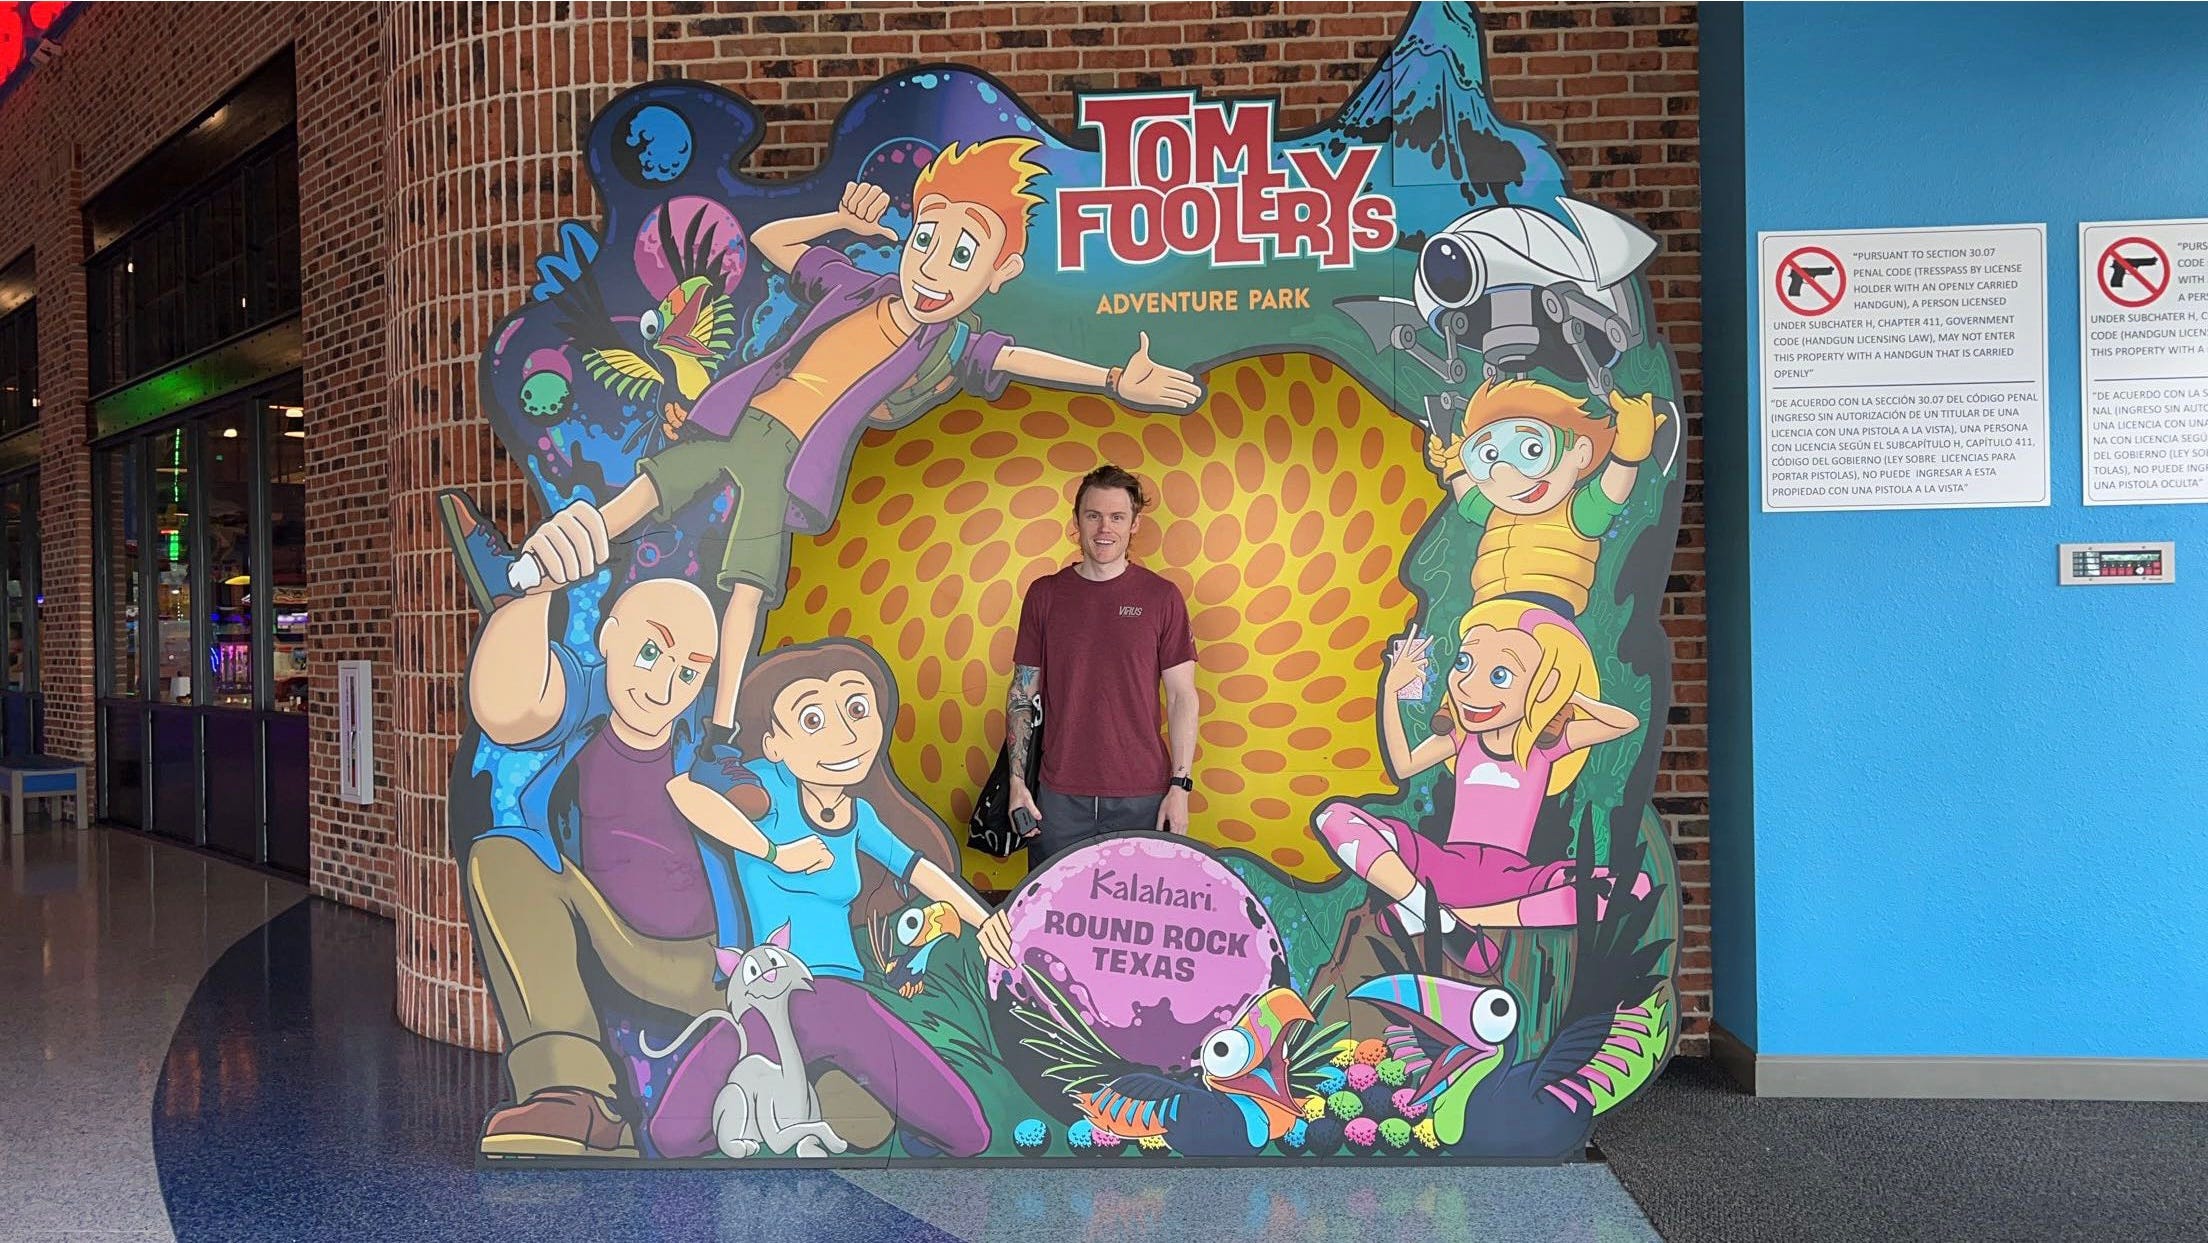 brandon wells in the tom foolery adventure park photo frame station